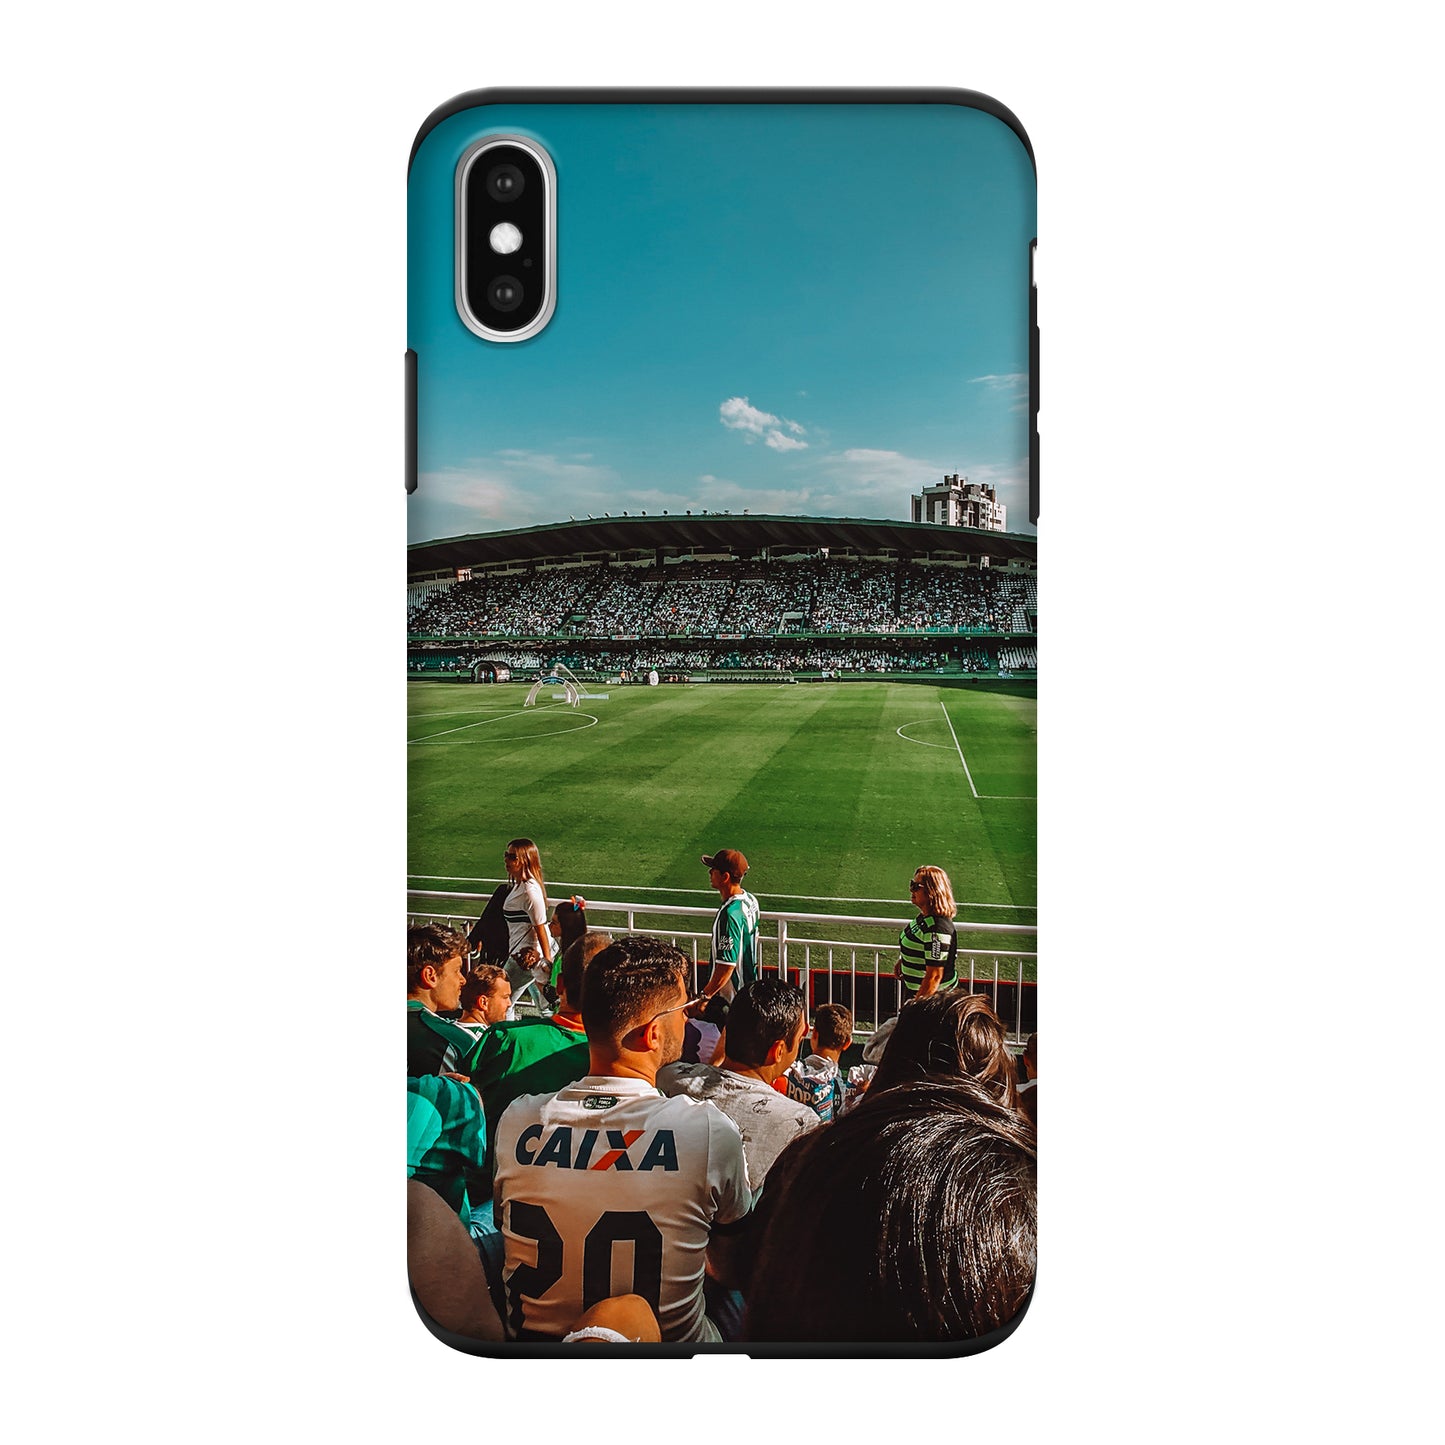 Apple iPhone Xs Max Tough case (fully printed, black insert)